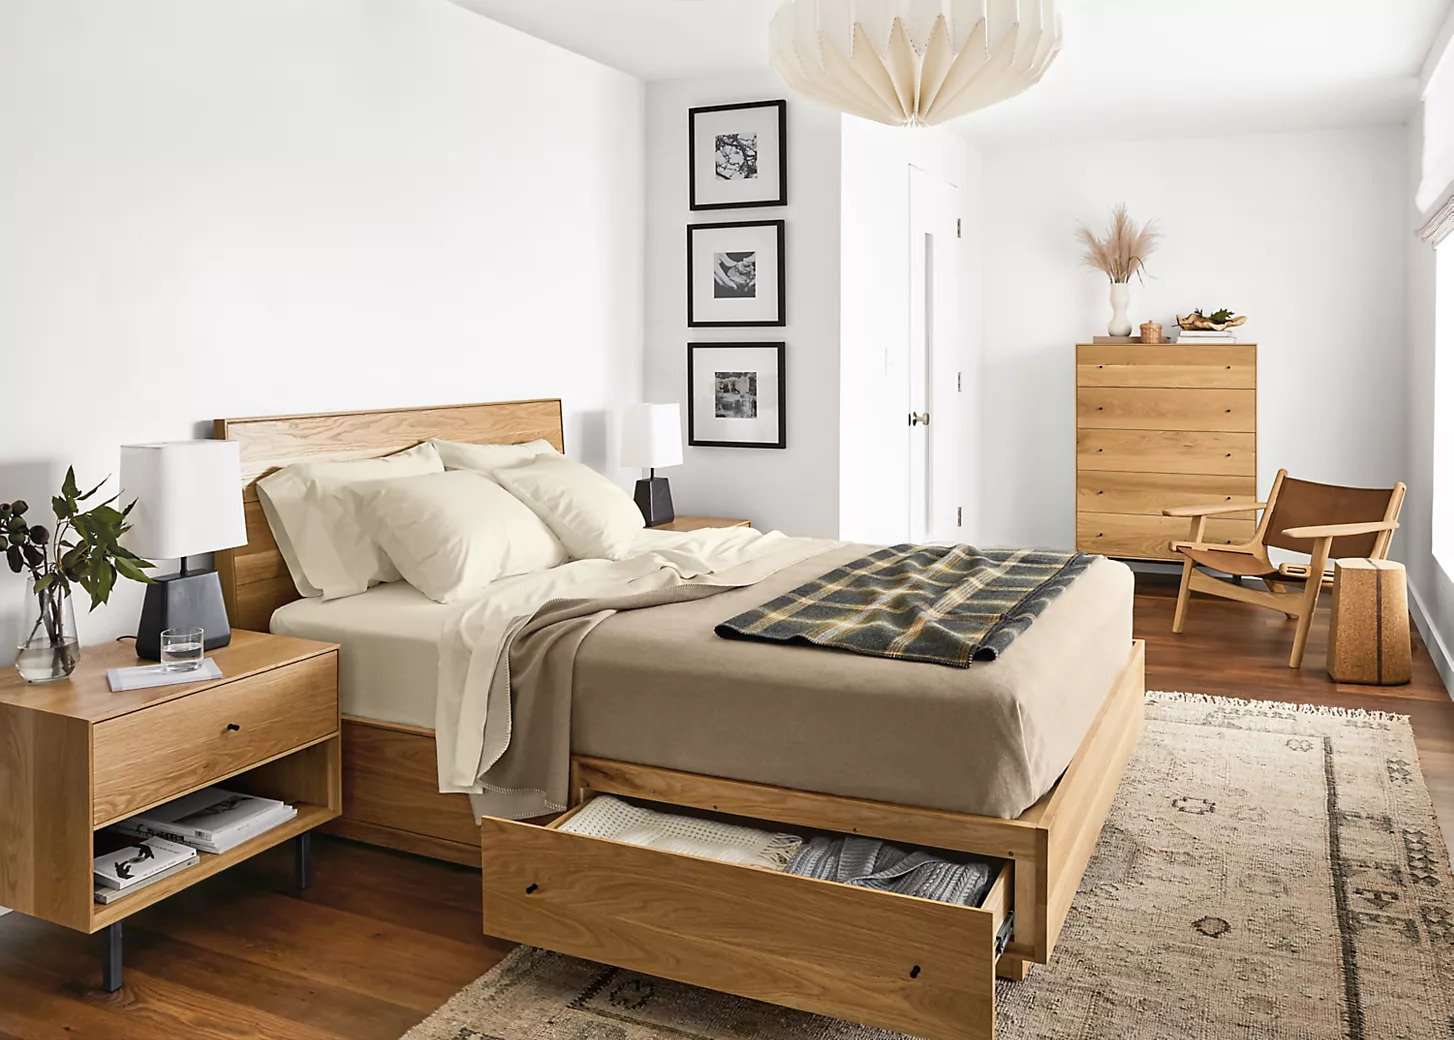 Room & Board Hudson Bed with Storage Drawers